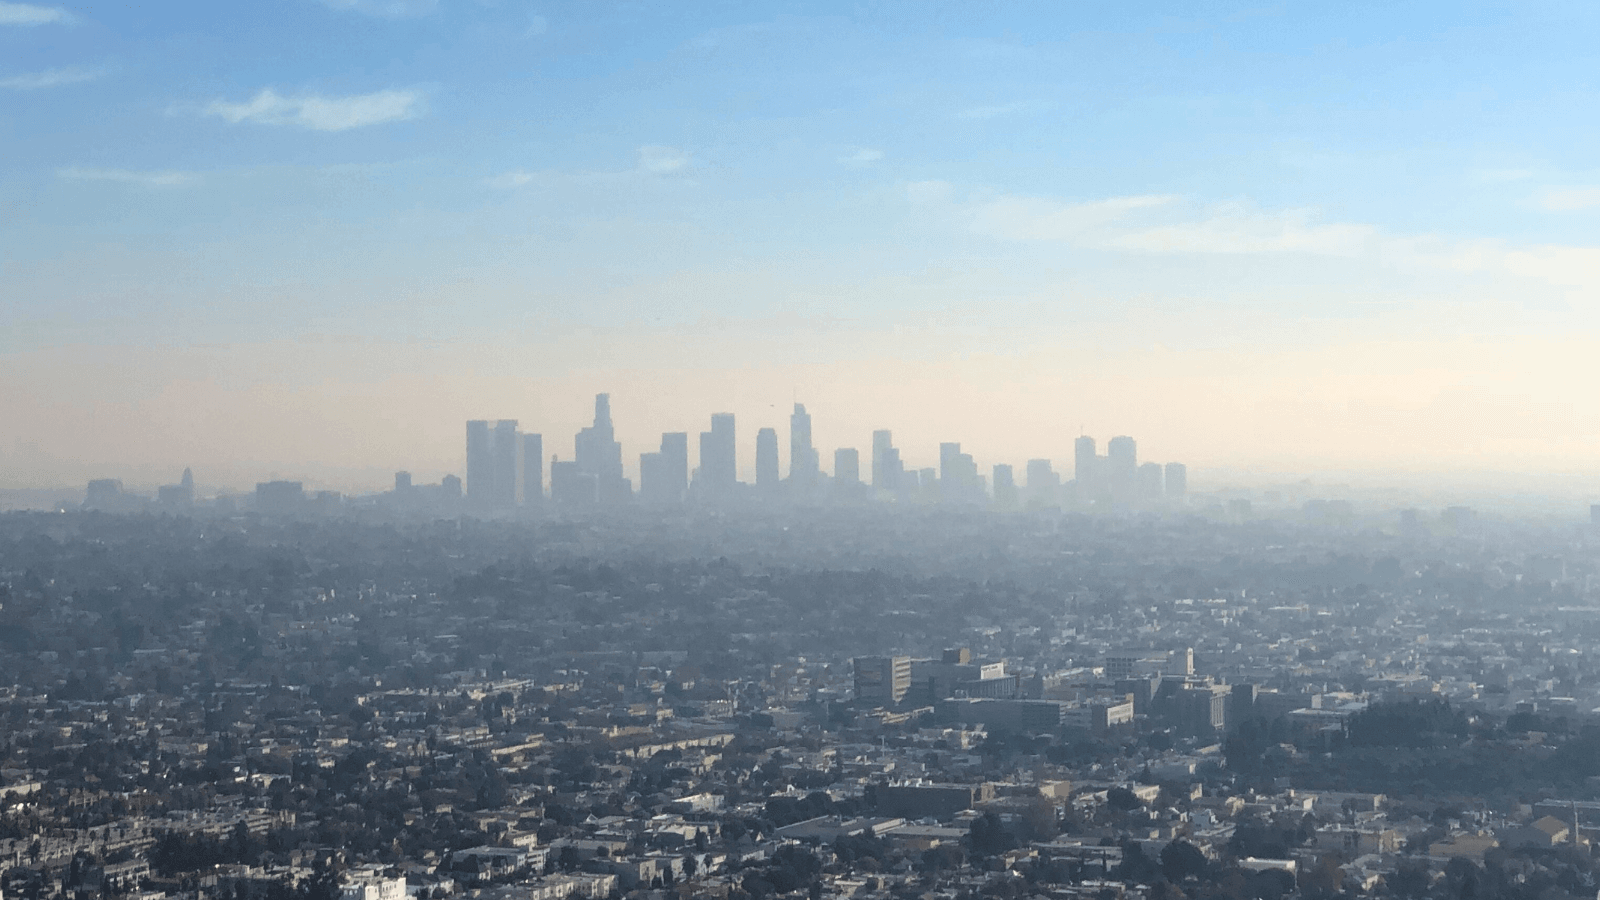 City surrounded by smog